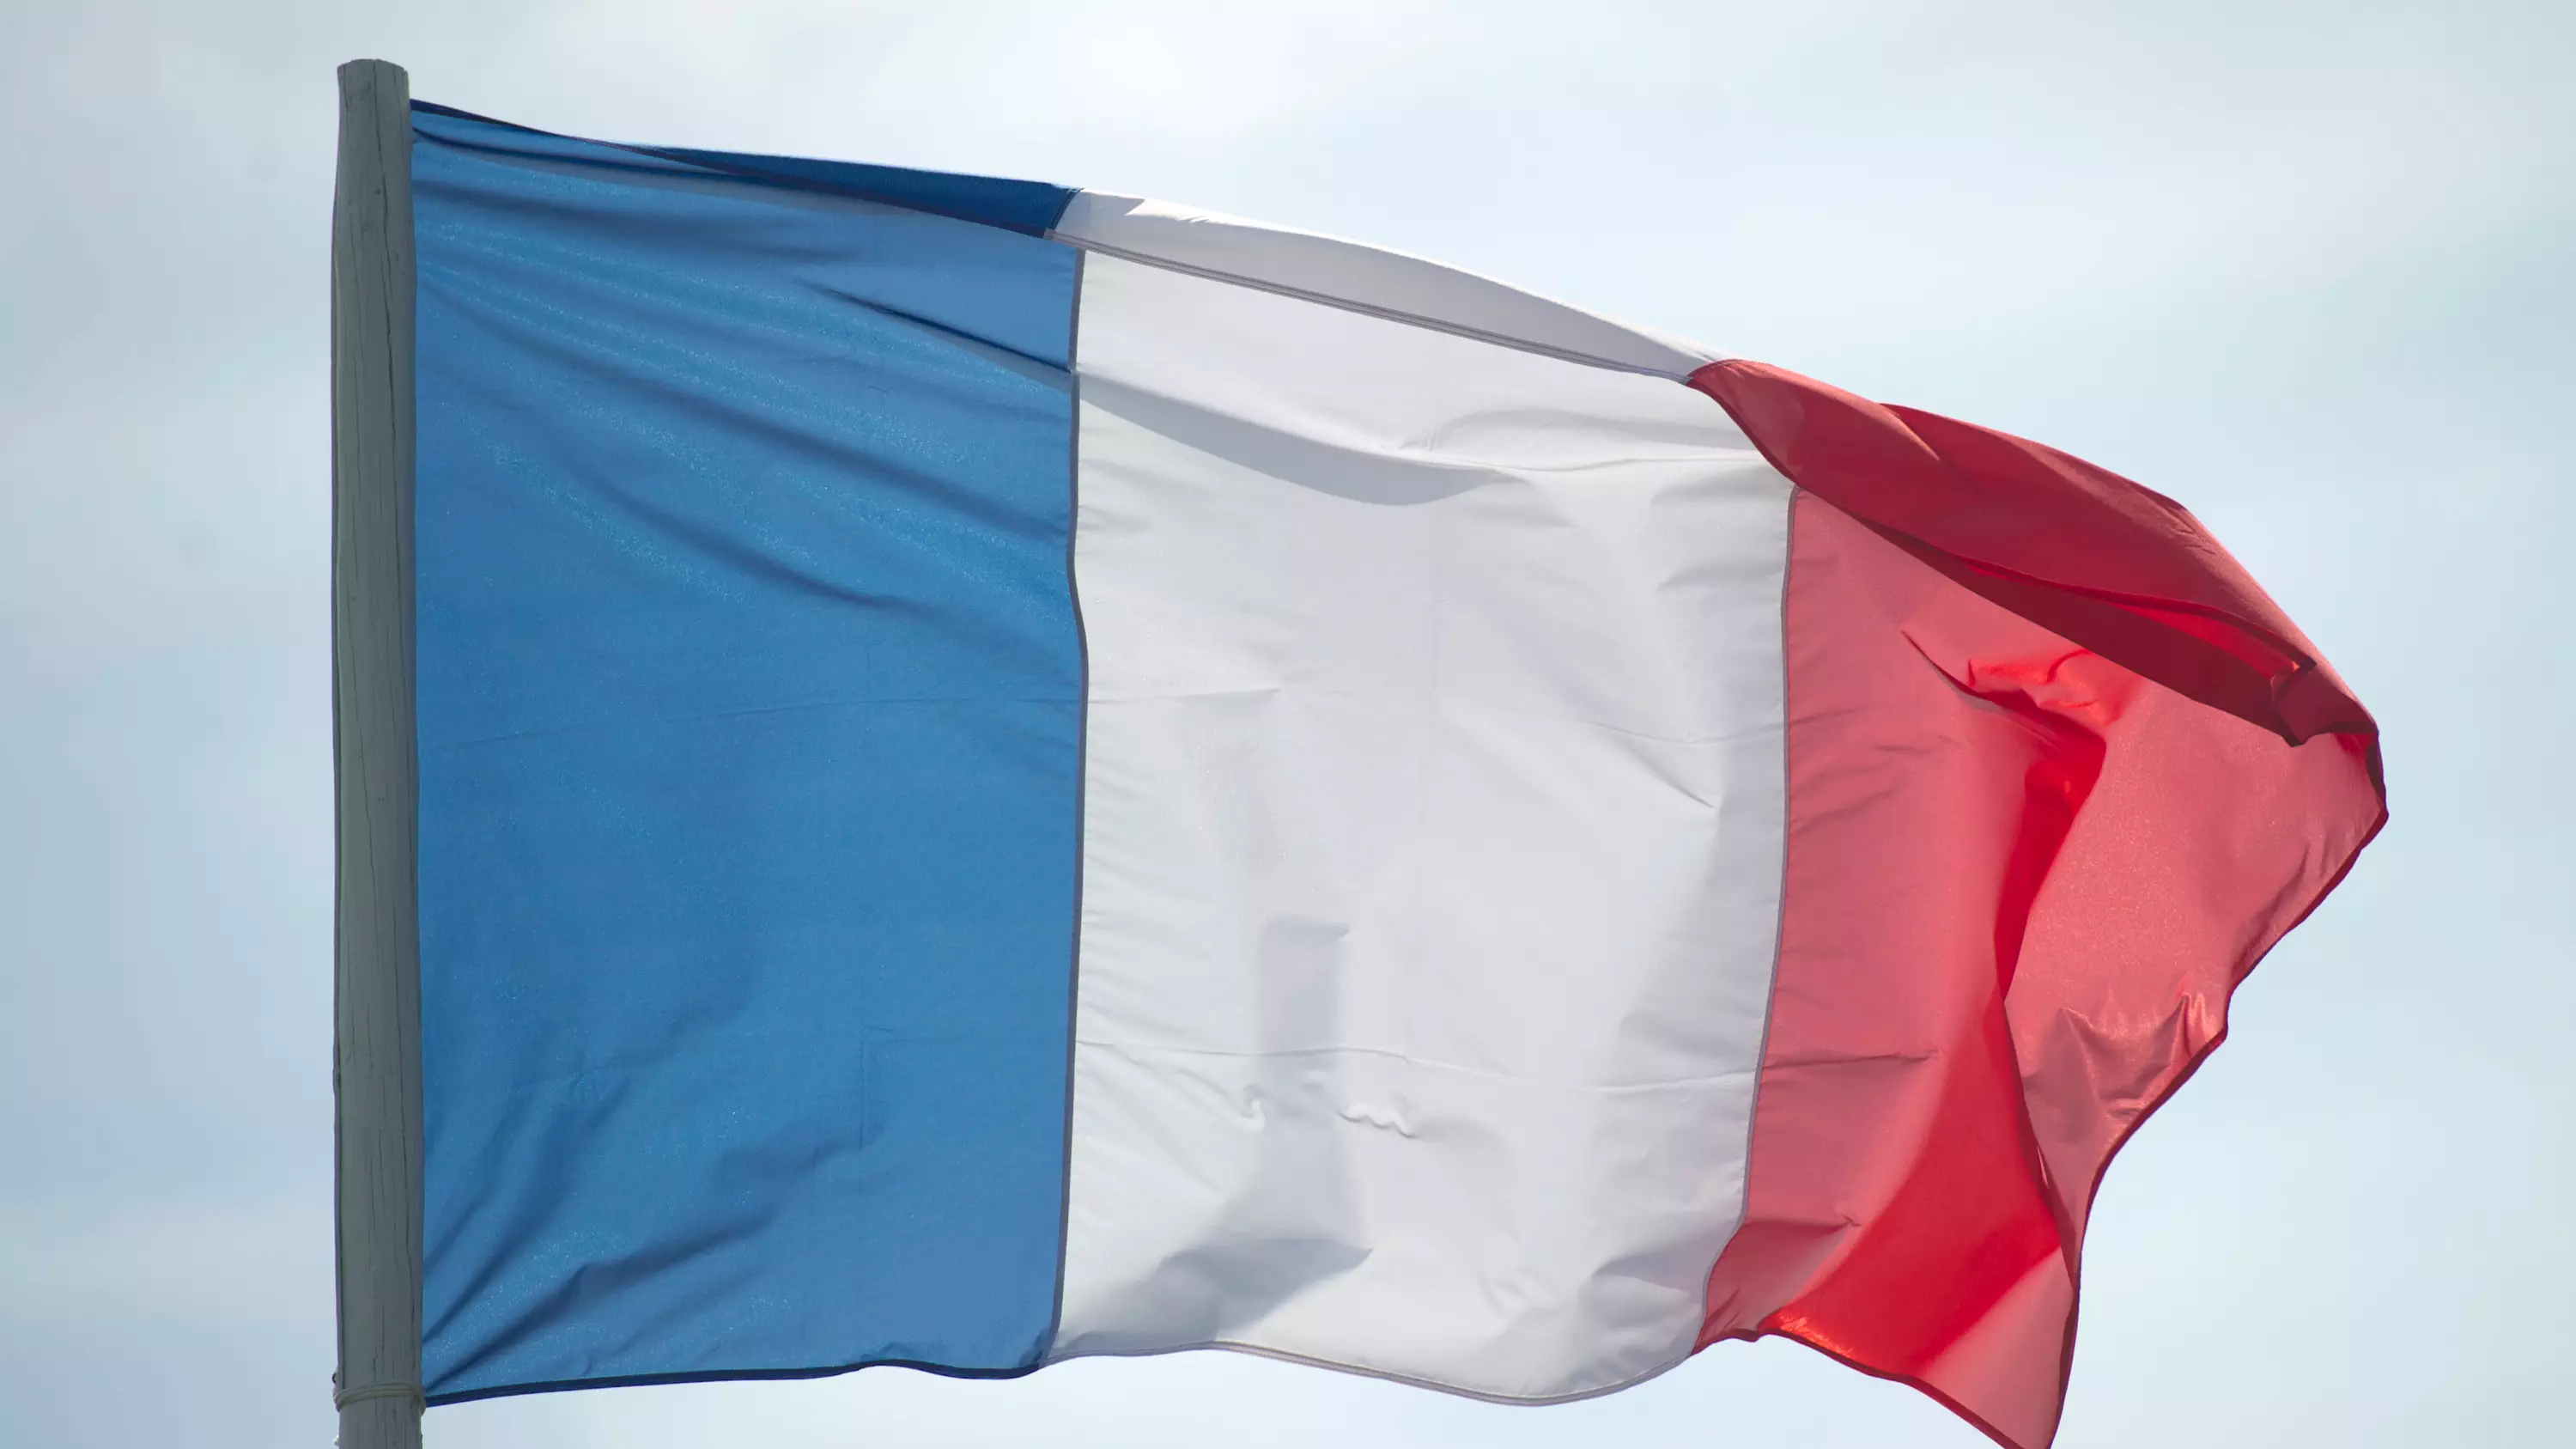 Man Files Lawsuit Against France After Country Seizes France.com Domain Name